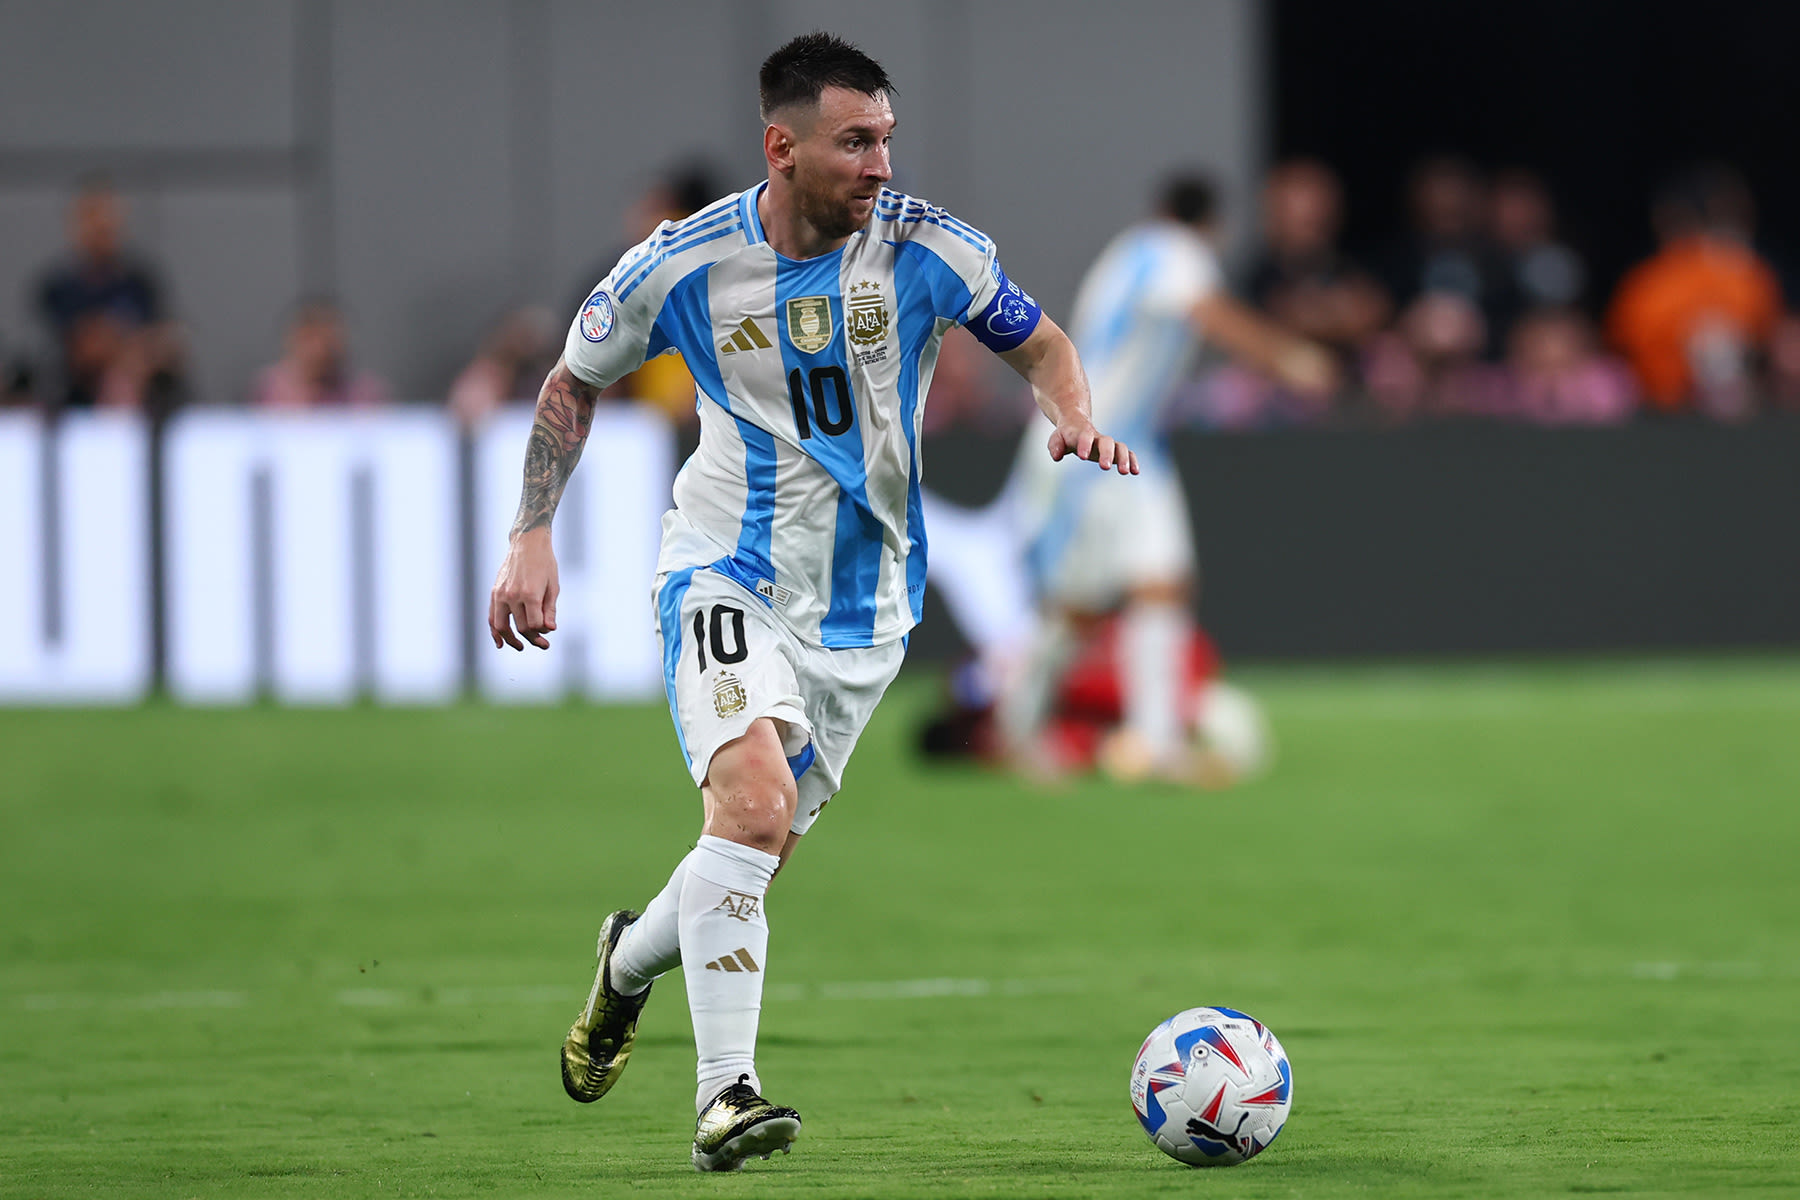 Argentina vs. Colombia Livestream: How to Watch the Copa America Final Online